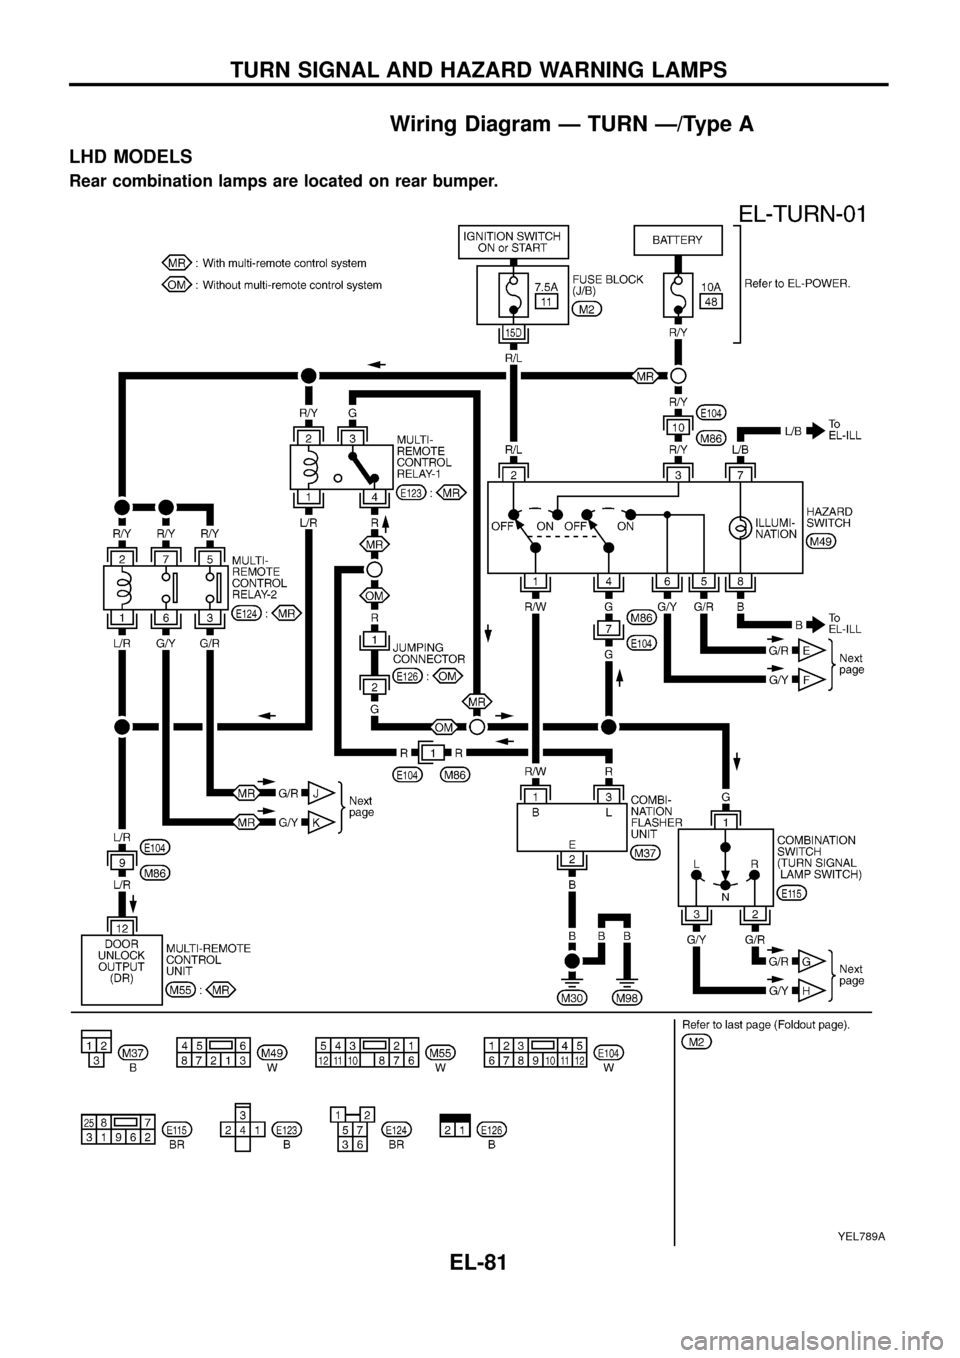 NISSAN PATROL 1998 Y61 / 5.G Electrical System Owners Manual Wiring Diagram Ð TURN Ð/Type A
LHD MODELS
Rear combination lamps are located on rear bumper.
YEL789A
TURN SIGNAL AND HAZARD WARNING LAMPS
EL-81 